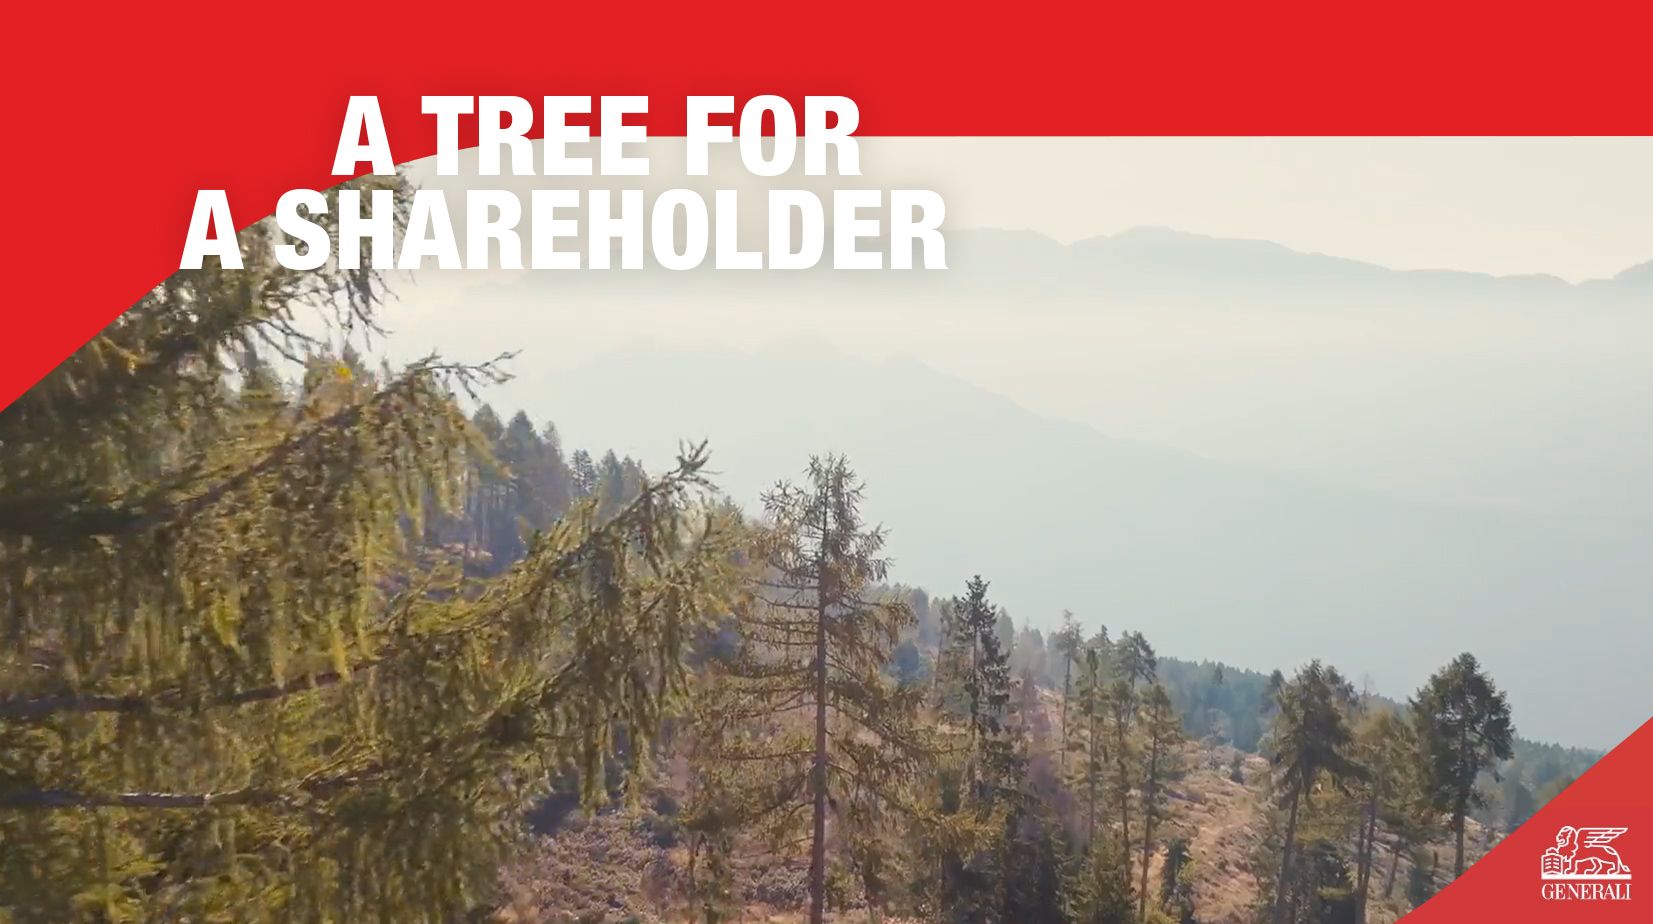 Video - A tree for a shareholder